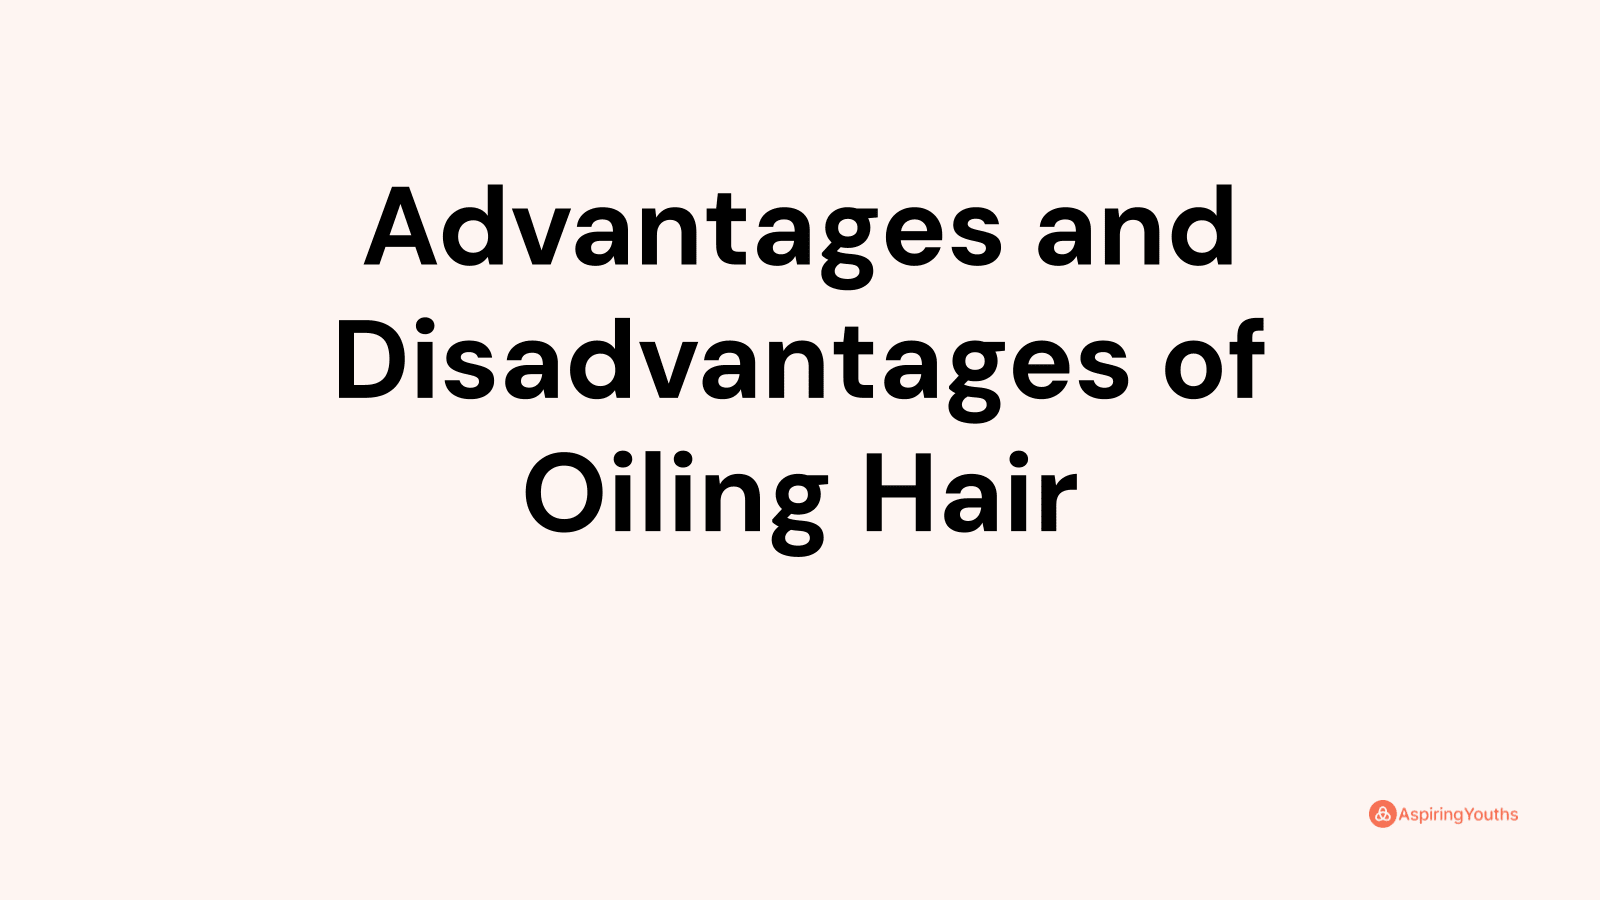 Advantages and disadvantages of Oiling Hair